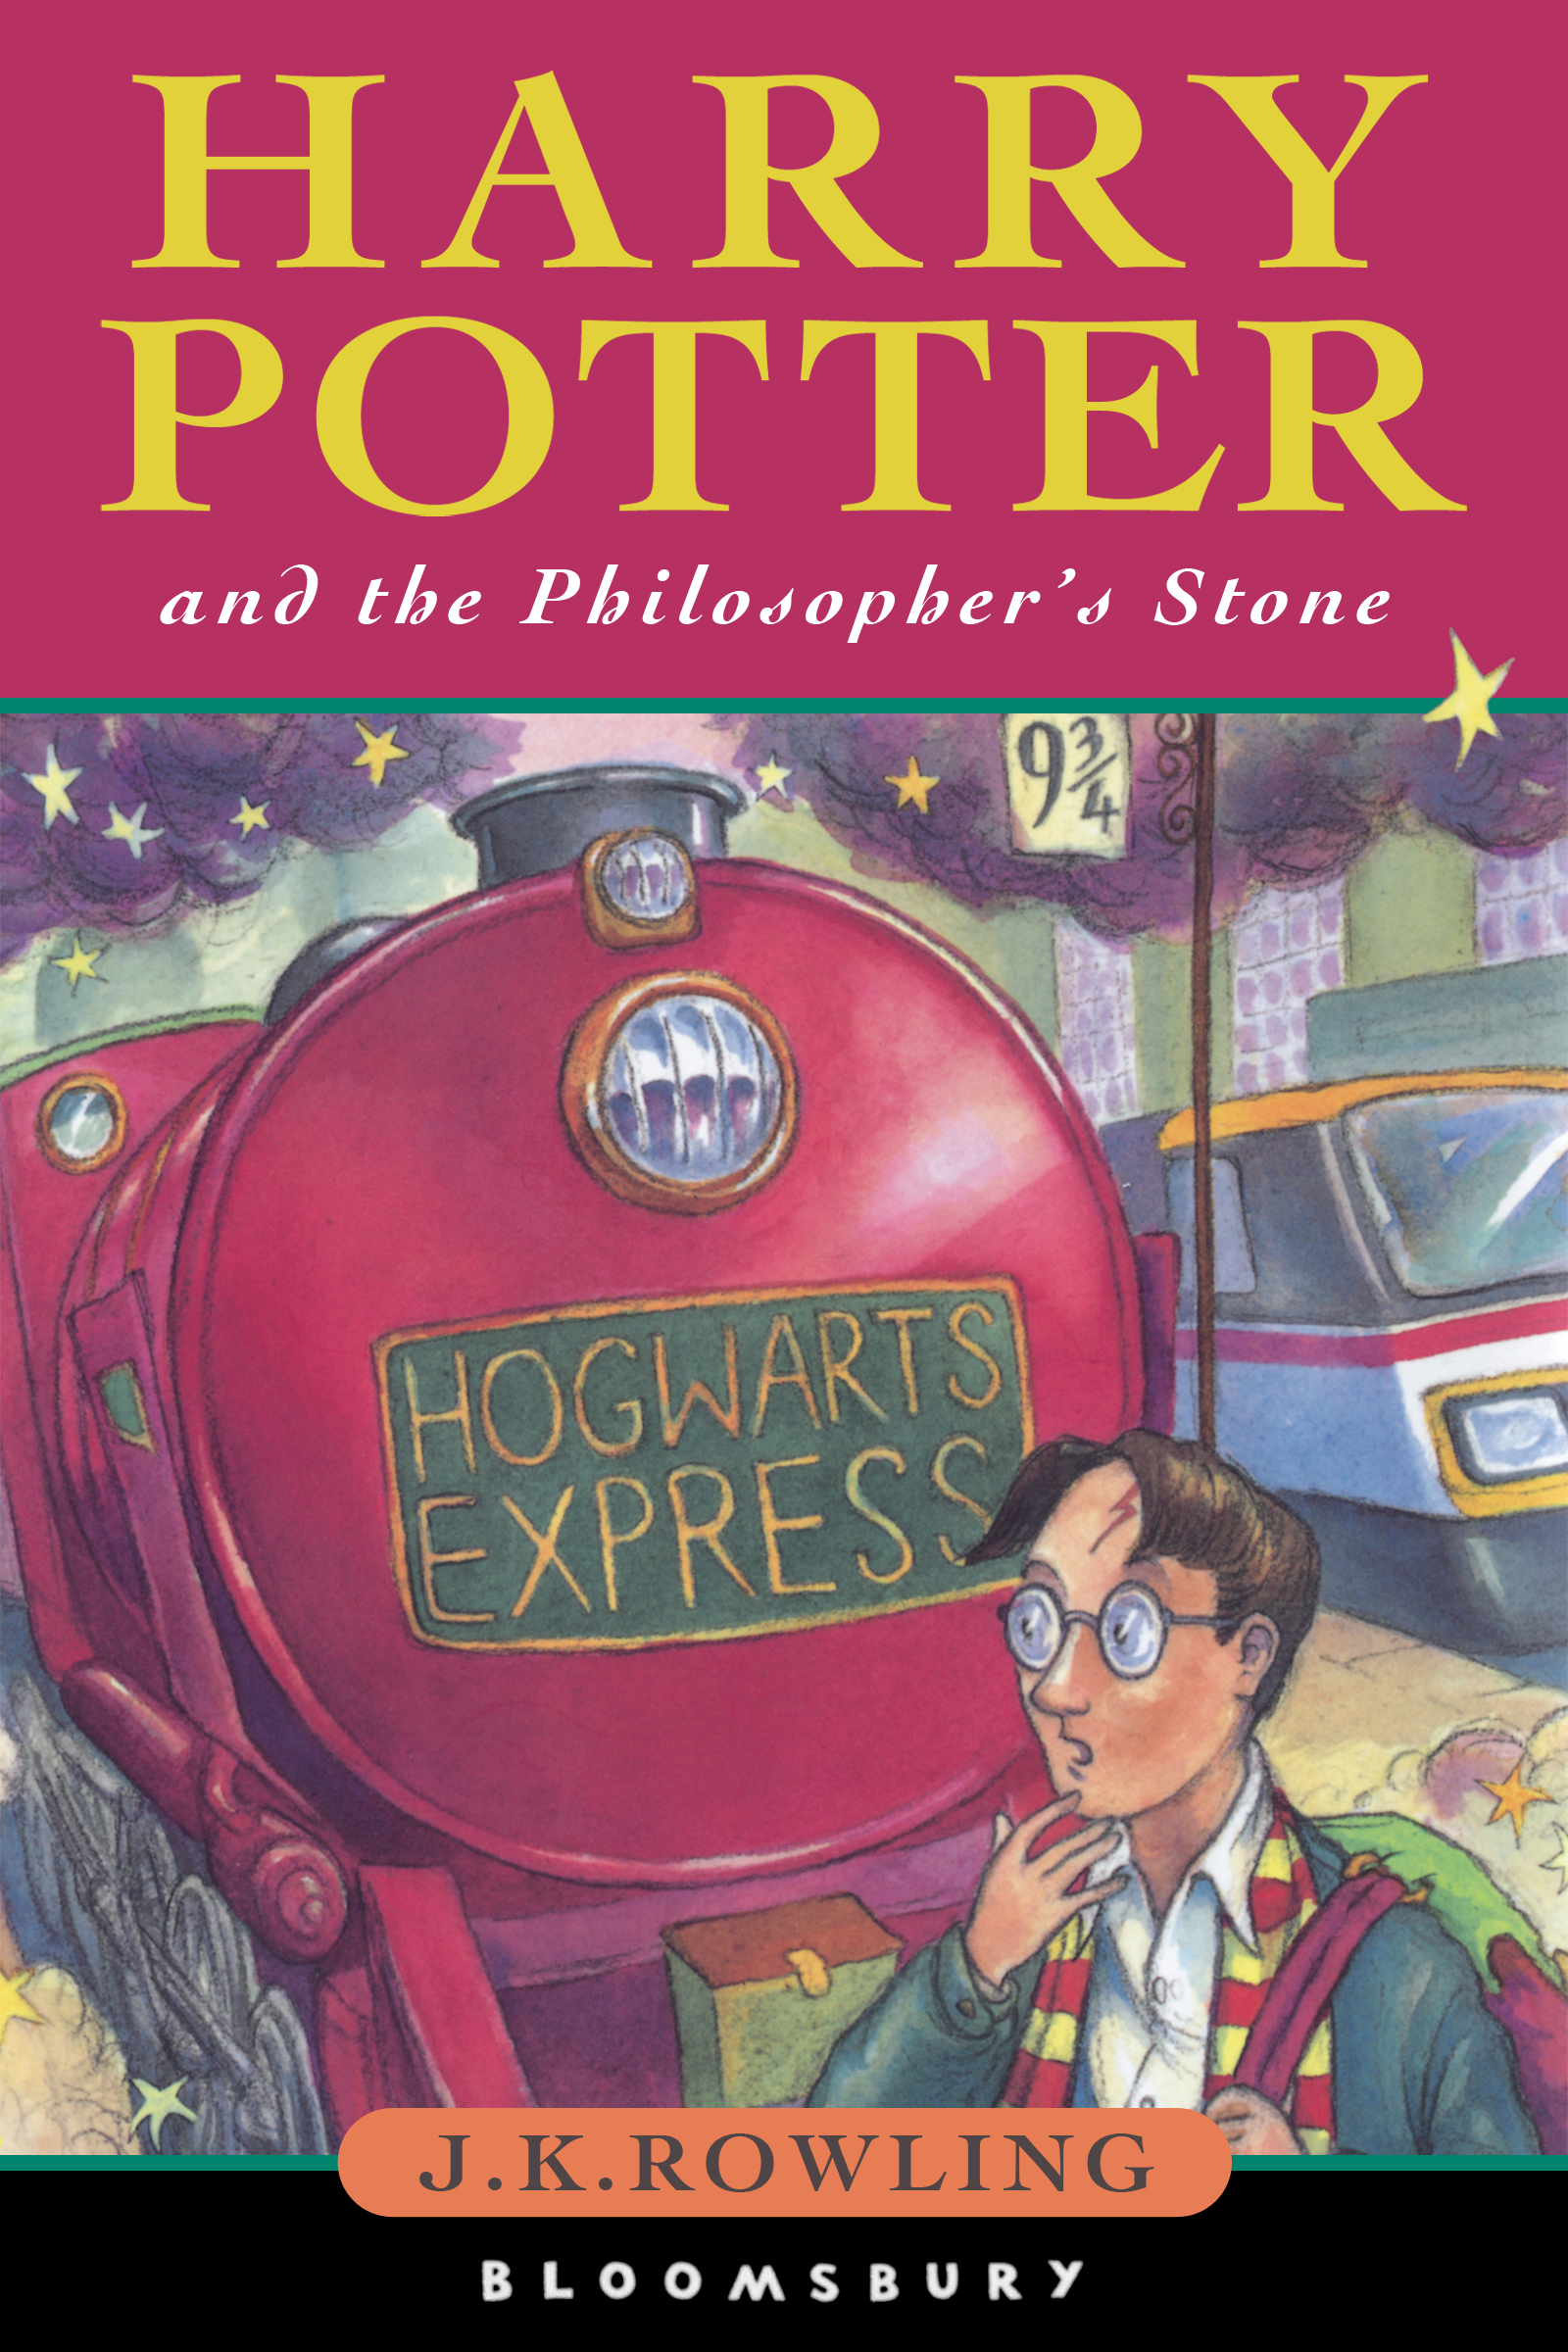 Harry Potter books with a rare typo are being valued at £20,000 or more